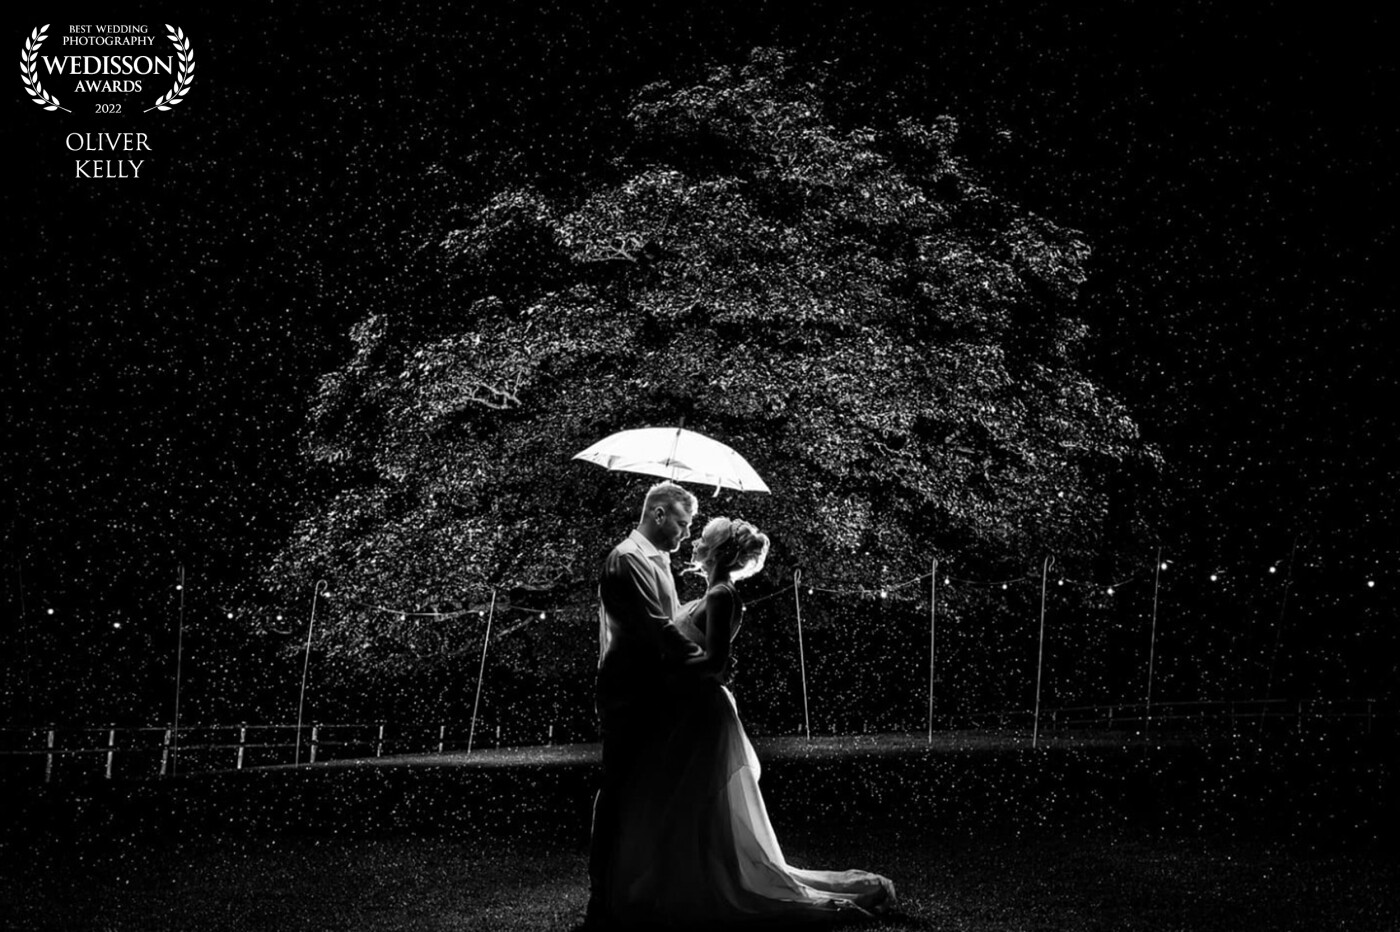 Being a wedding photographer in the UK often means that you have to be prepared for rain! Rain however does not mean that the wedding is ruined or that the pictures will turn out bad... Rain means we think outside the box and get creative!